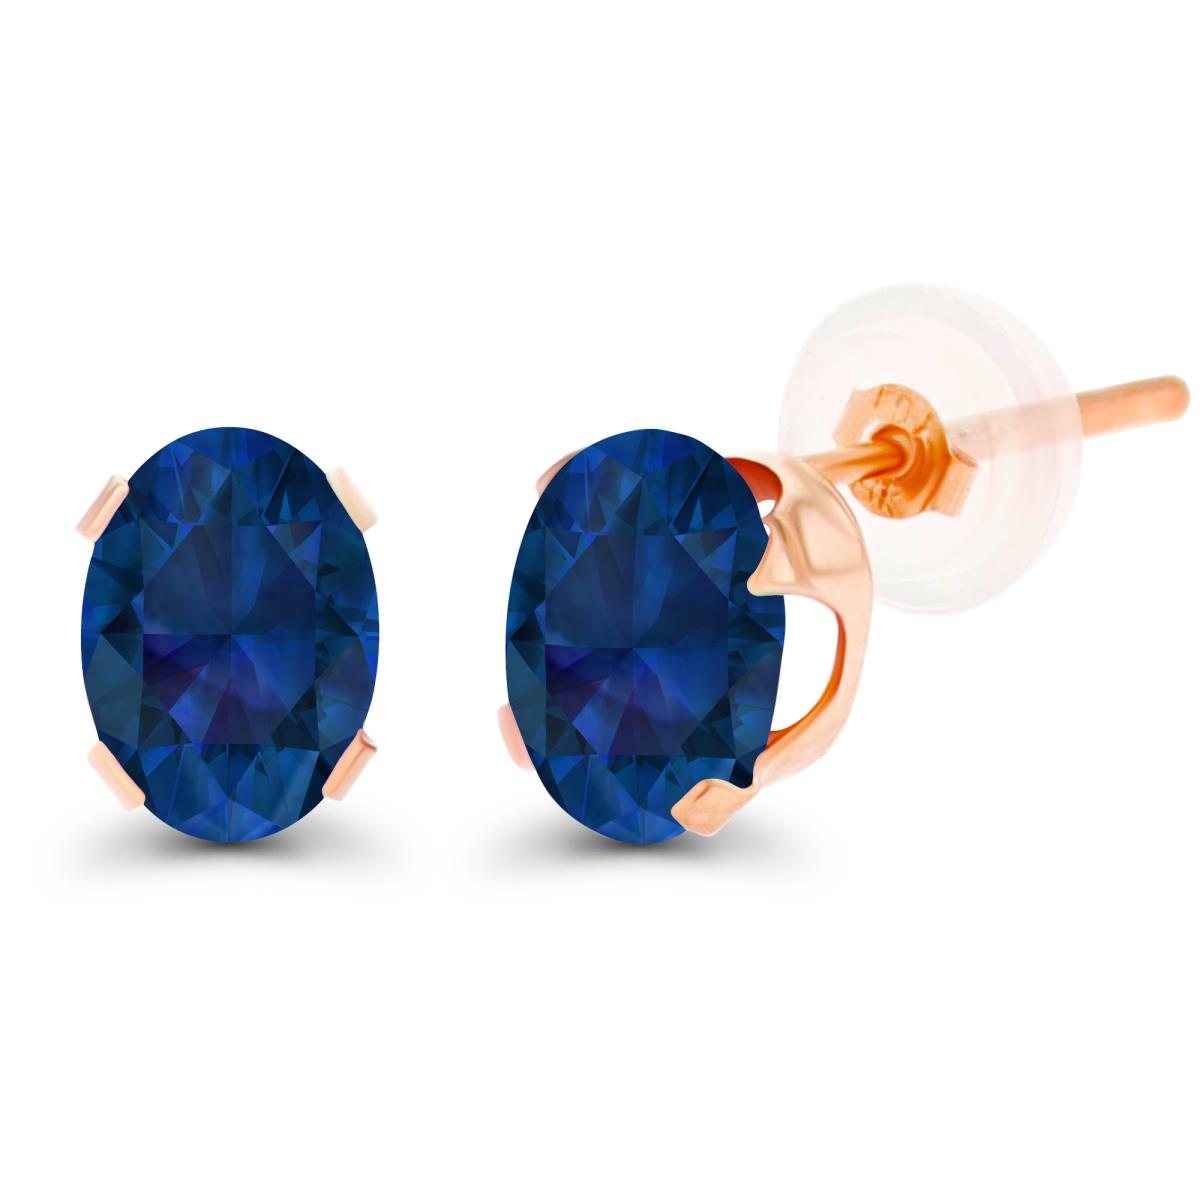 10K Rose Gold 7x5mm Oval Cr Blue Sapphire Stud Earring with Silicone Back